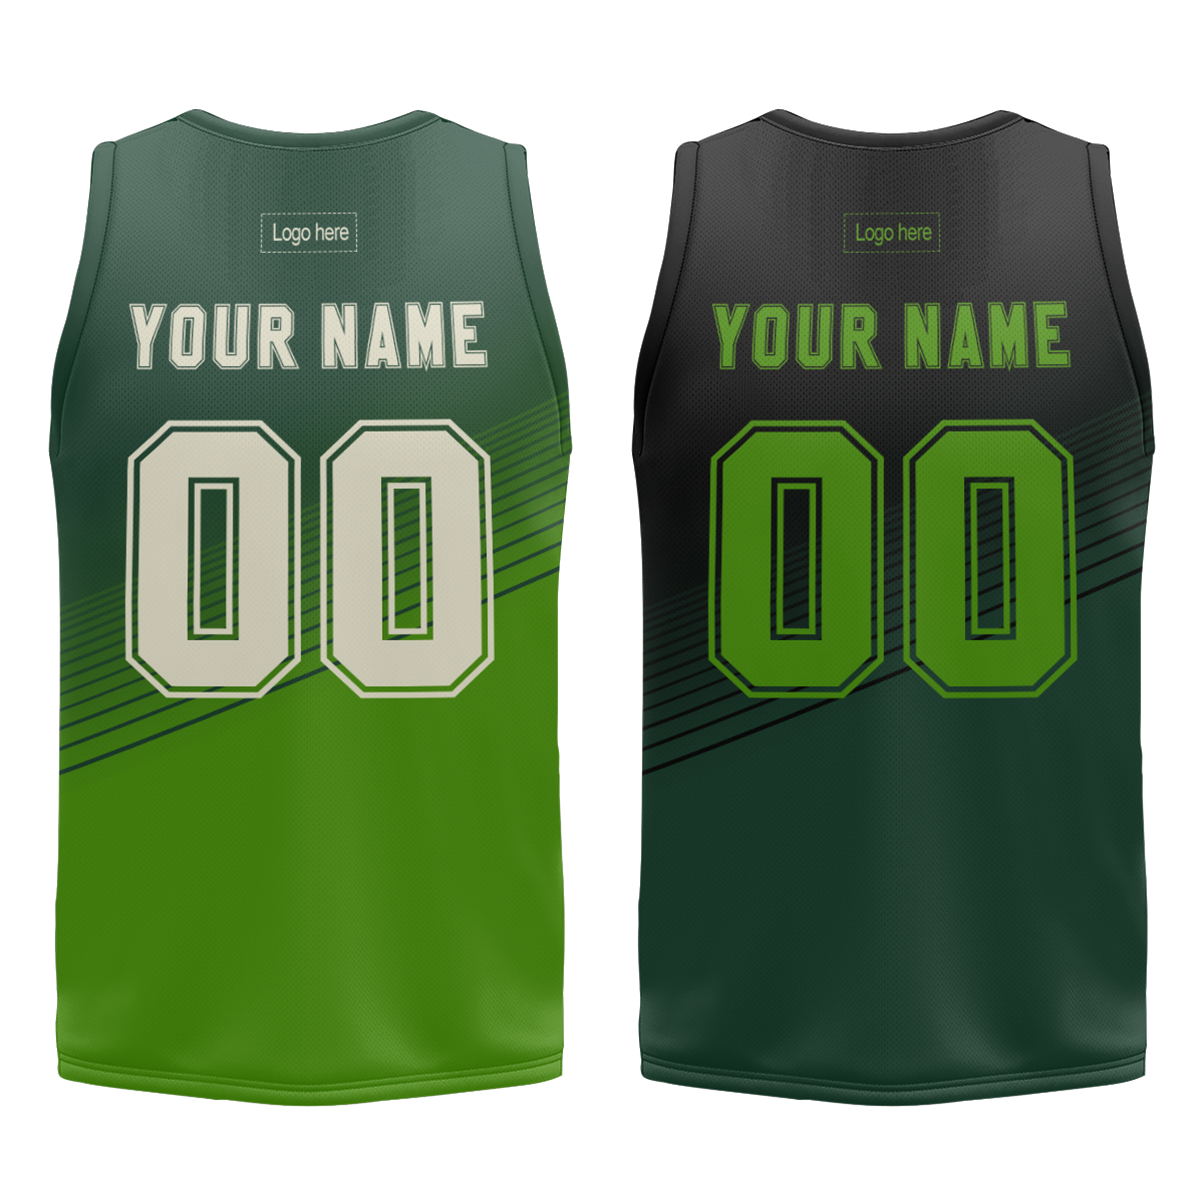 cheap-custom-reversible-basketball-jerseys-sublimation-with-numbers-team-design-print-blank-basketball-uniforms-at-cj-pod-6